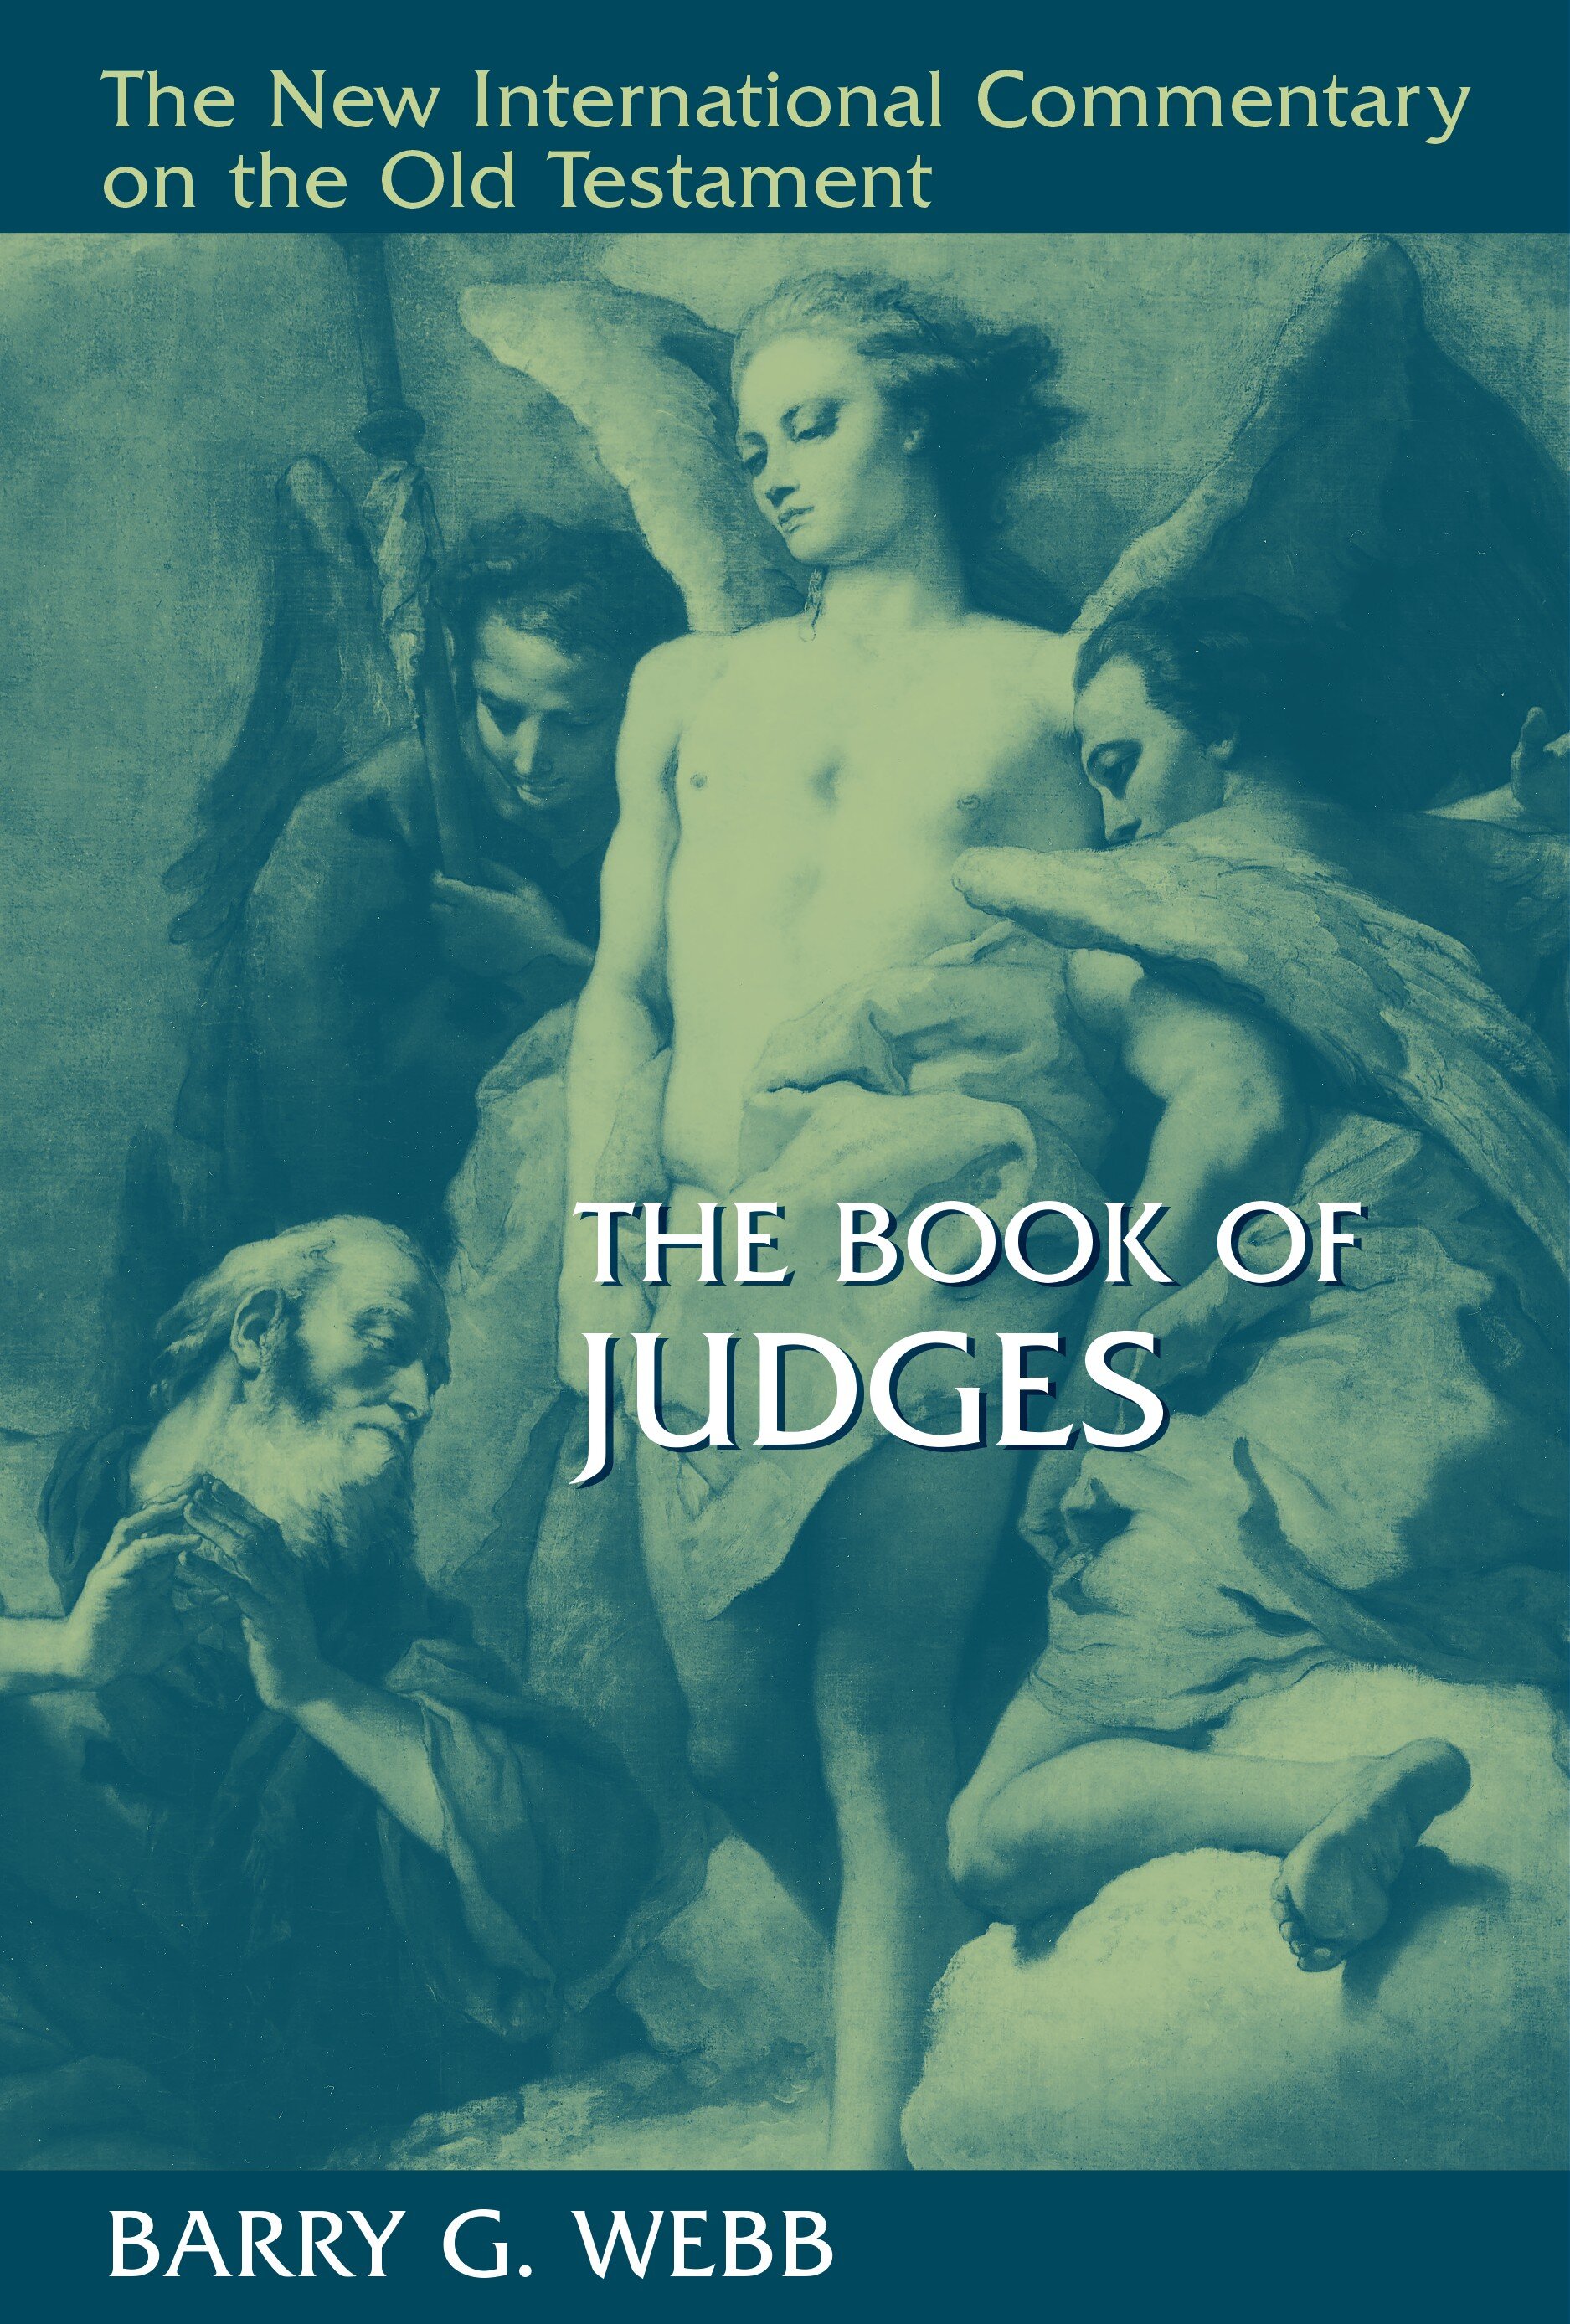 The Book of Judges (The New International Commentary on the Old Testament | NICOT)